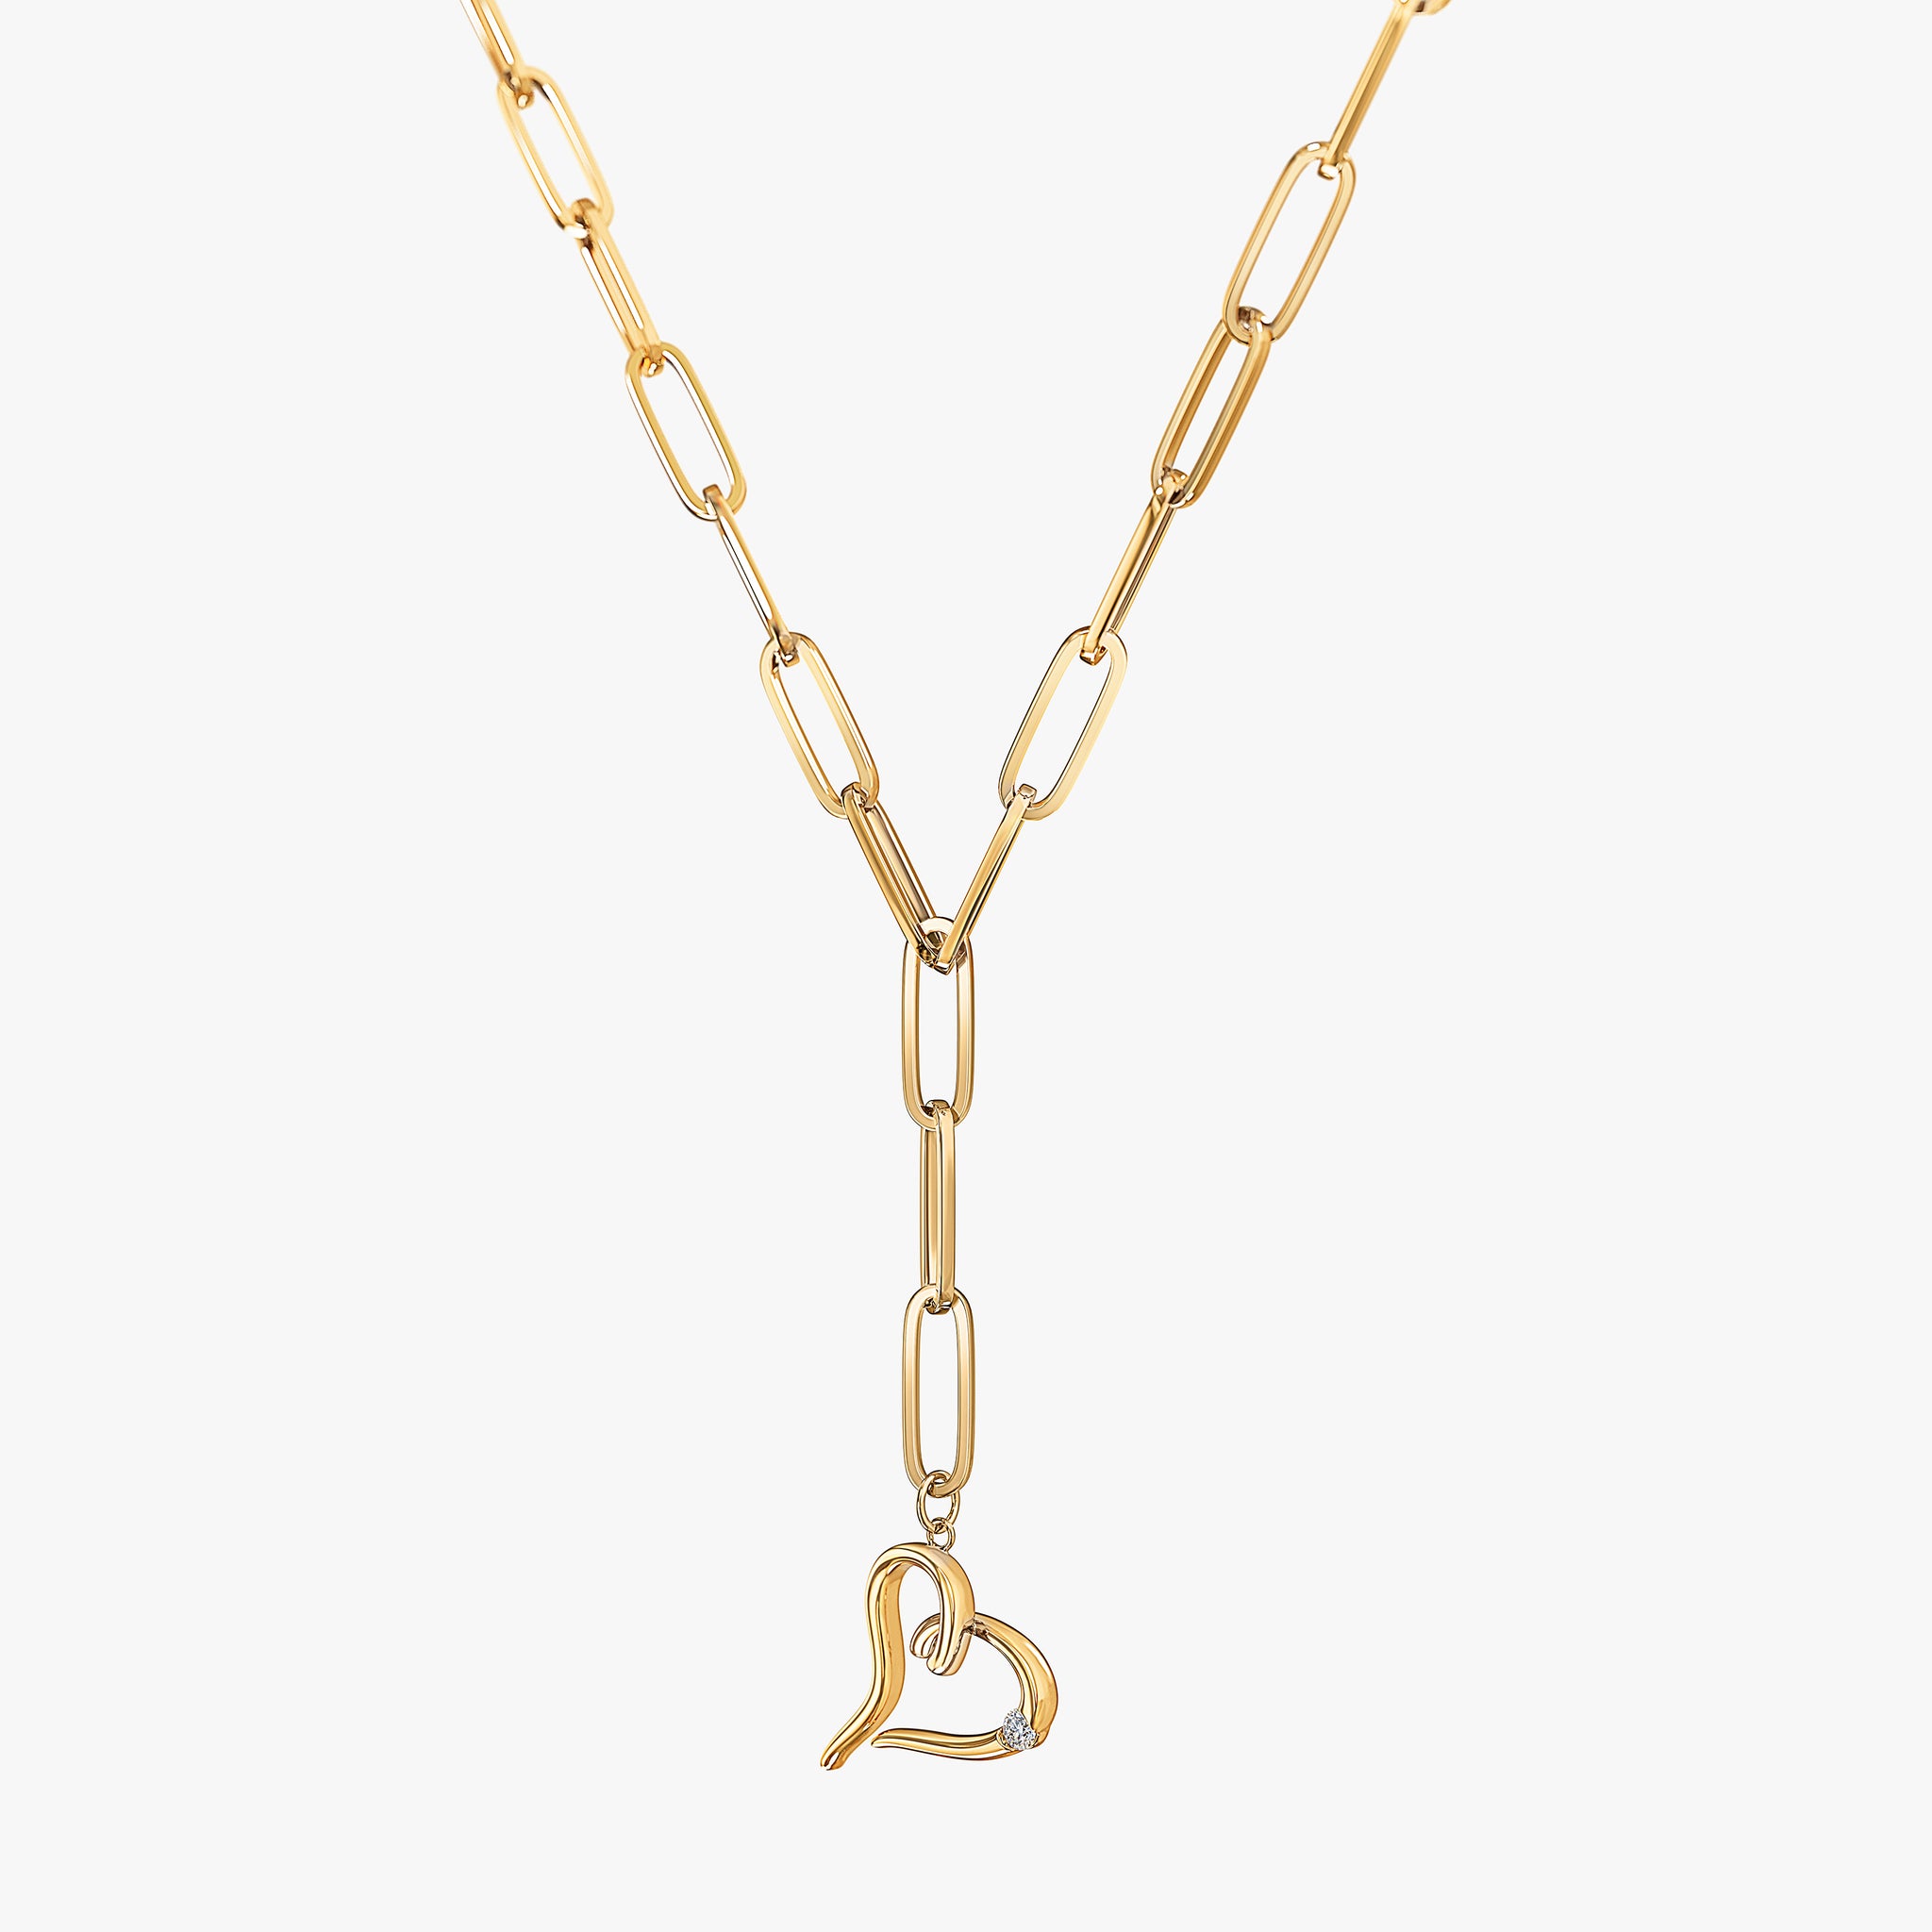 14kt Yellow Gold Paperclip Bracelet with Heart Charm